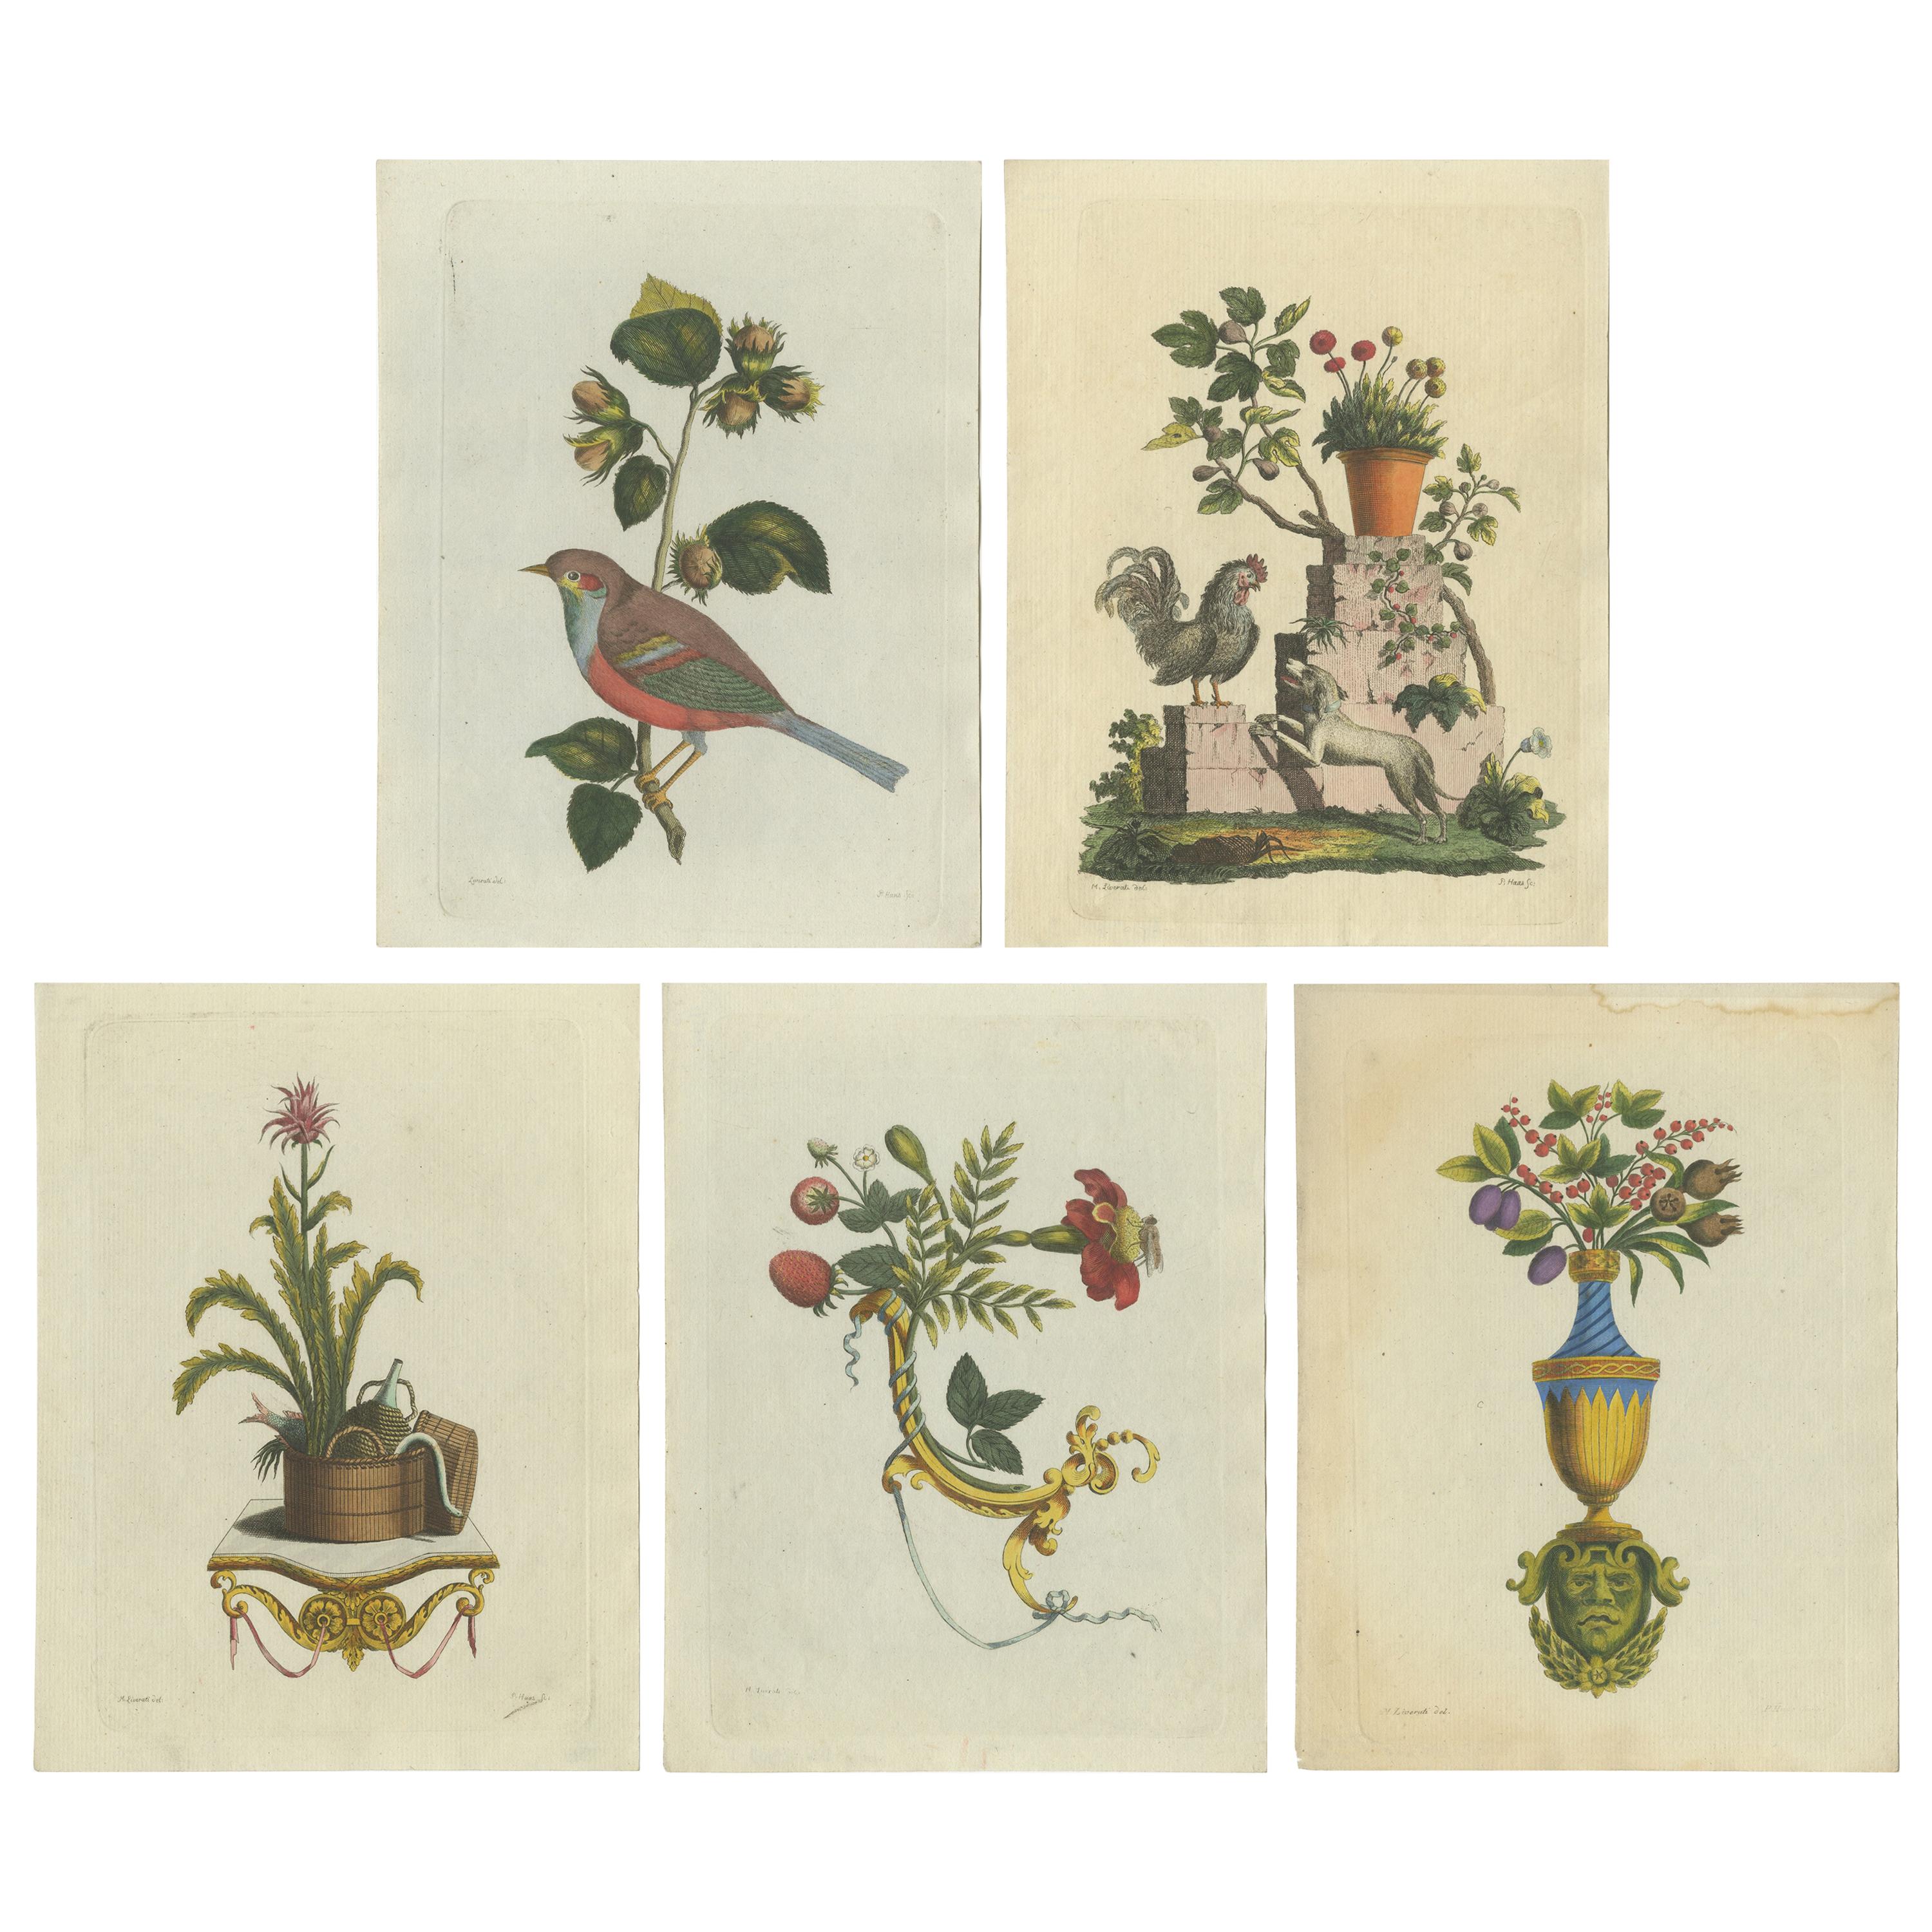 Set of 5 Antique Prints of Various Animals and Ornaments by Haas 'c.1800'